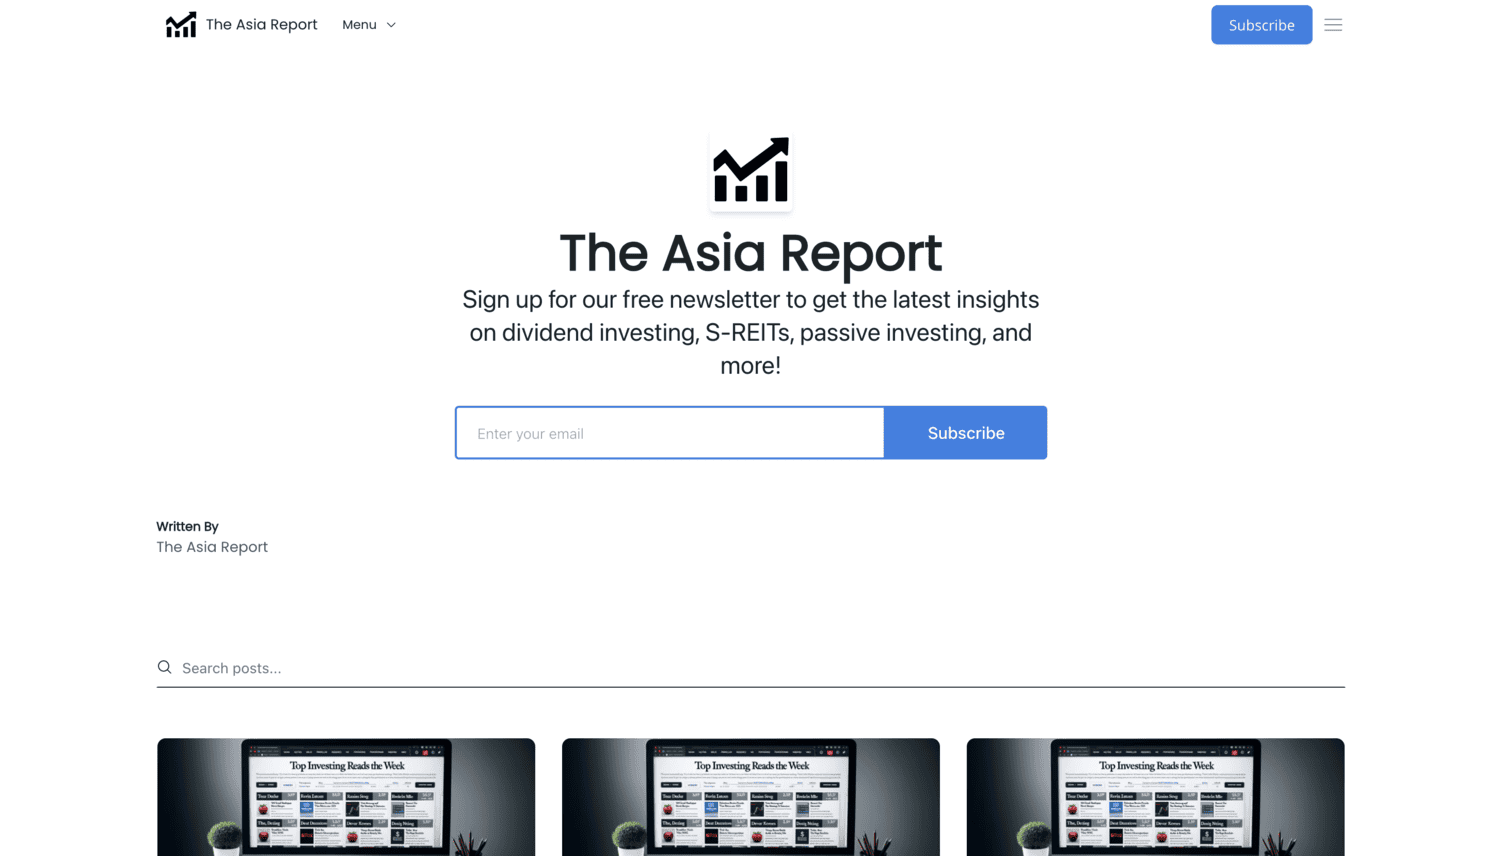 The Asia Report